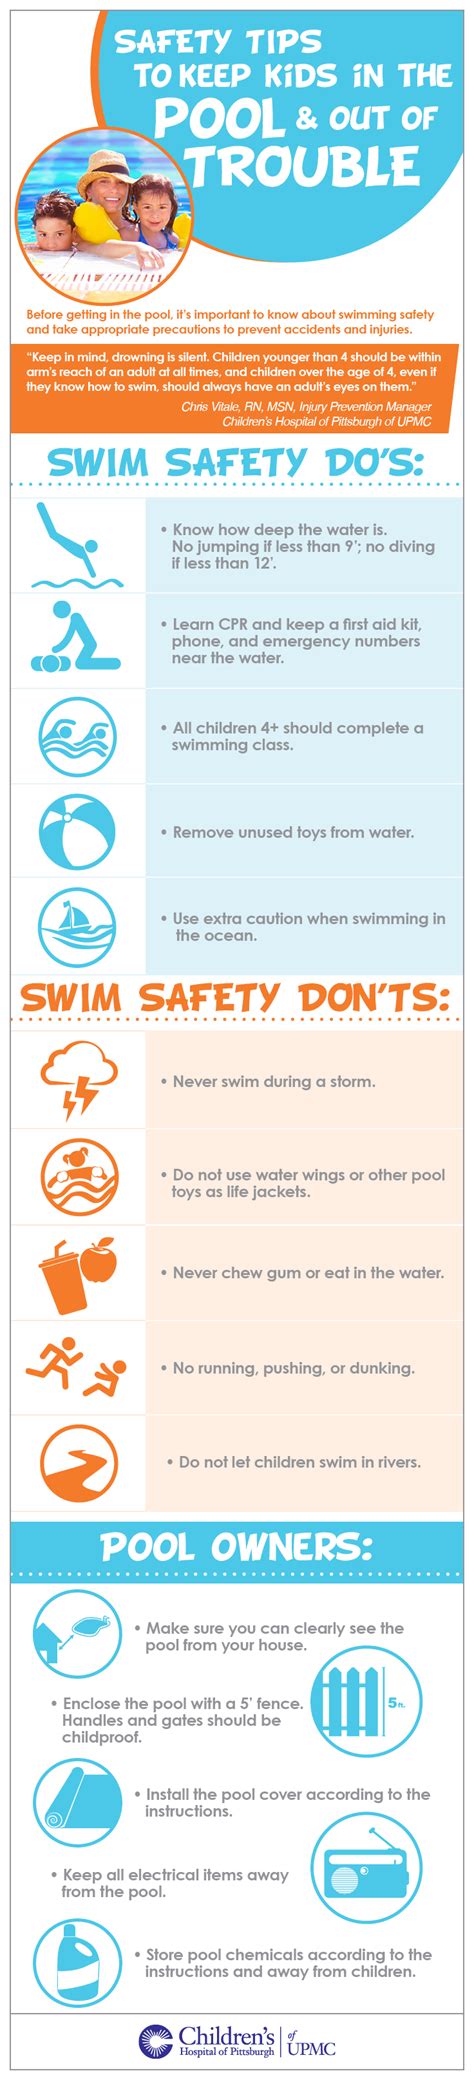 Swimming Safety Tips For Parents And Kids Upmc Healthbeat